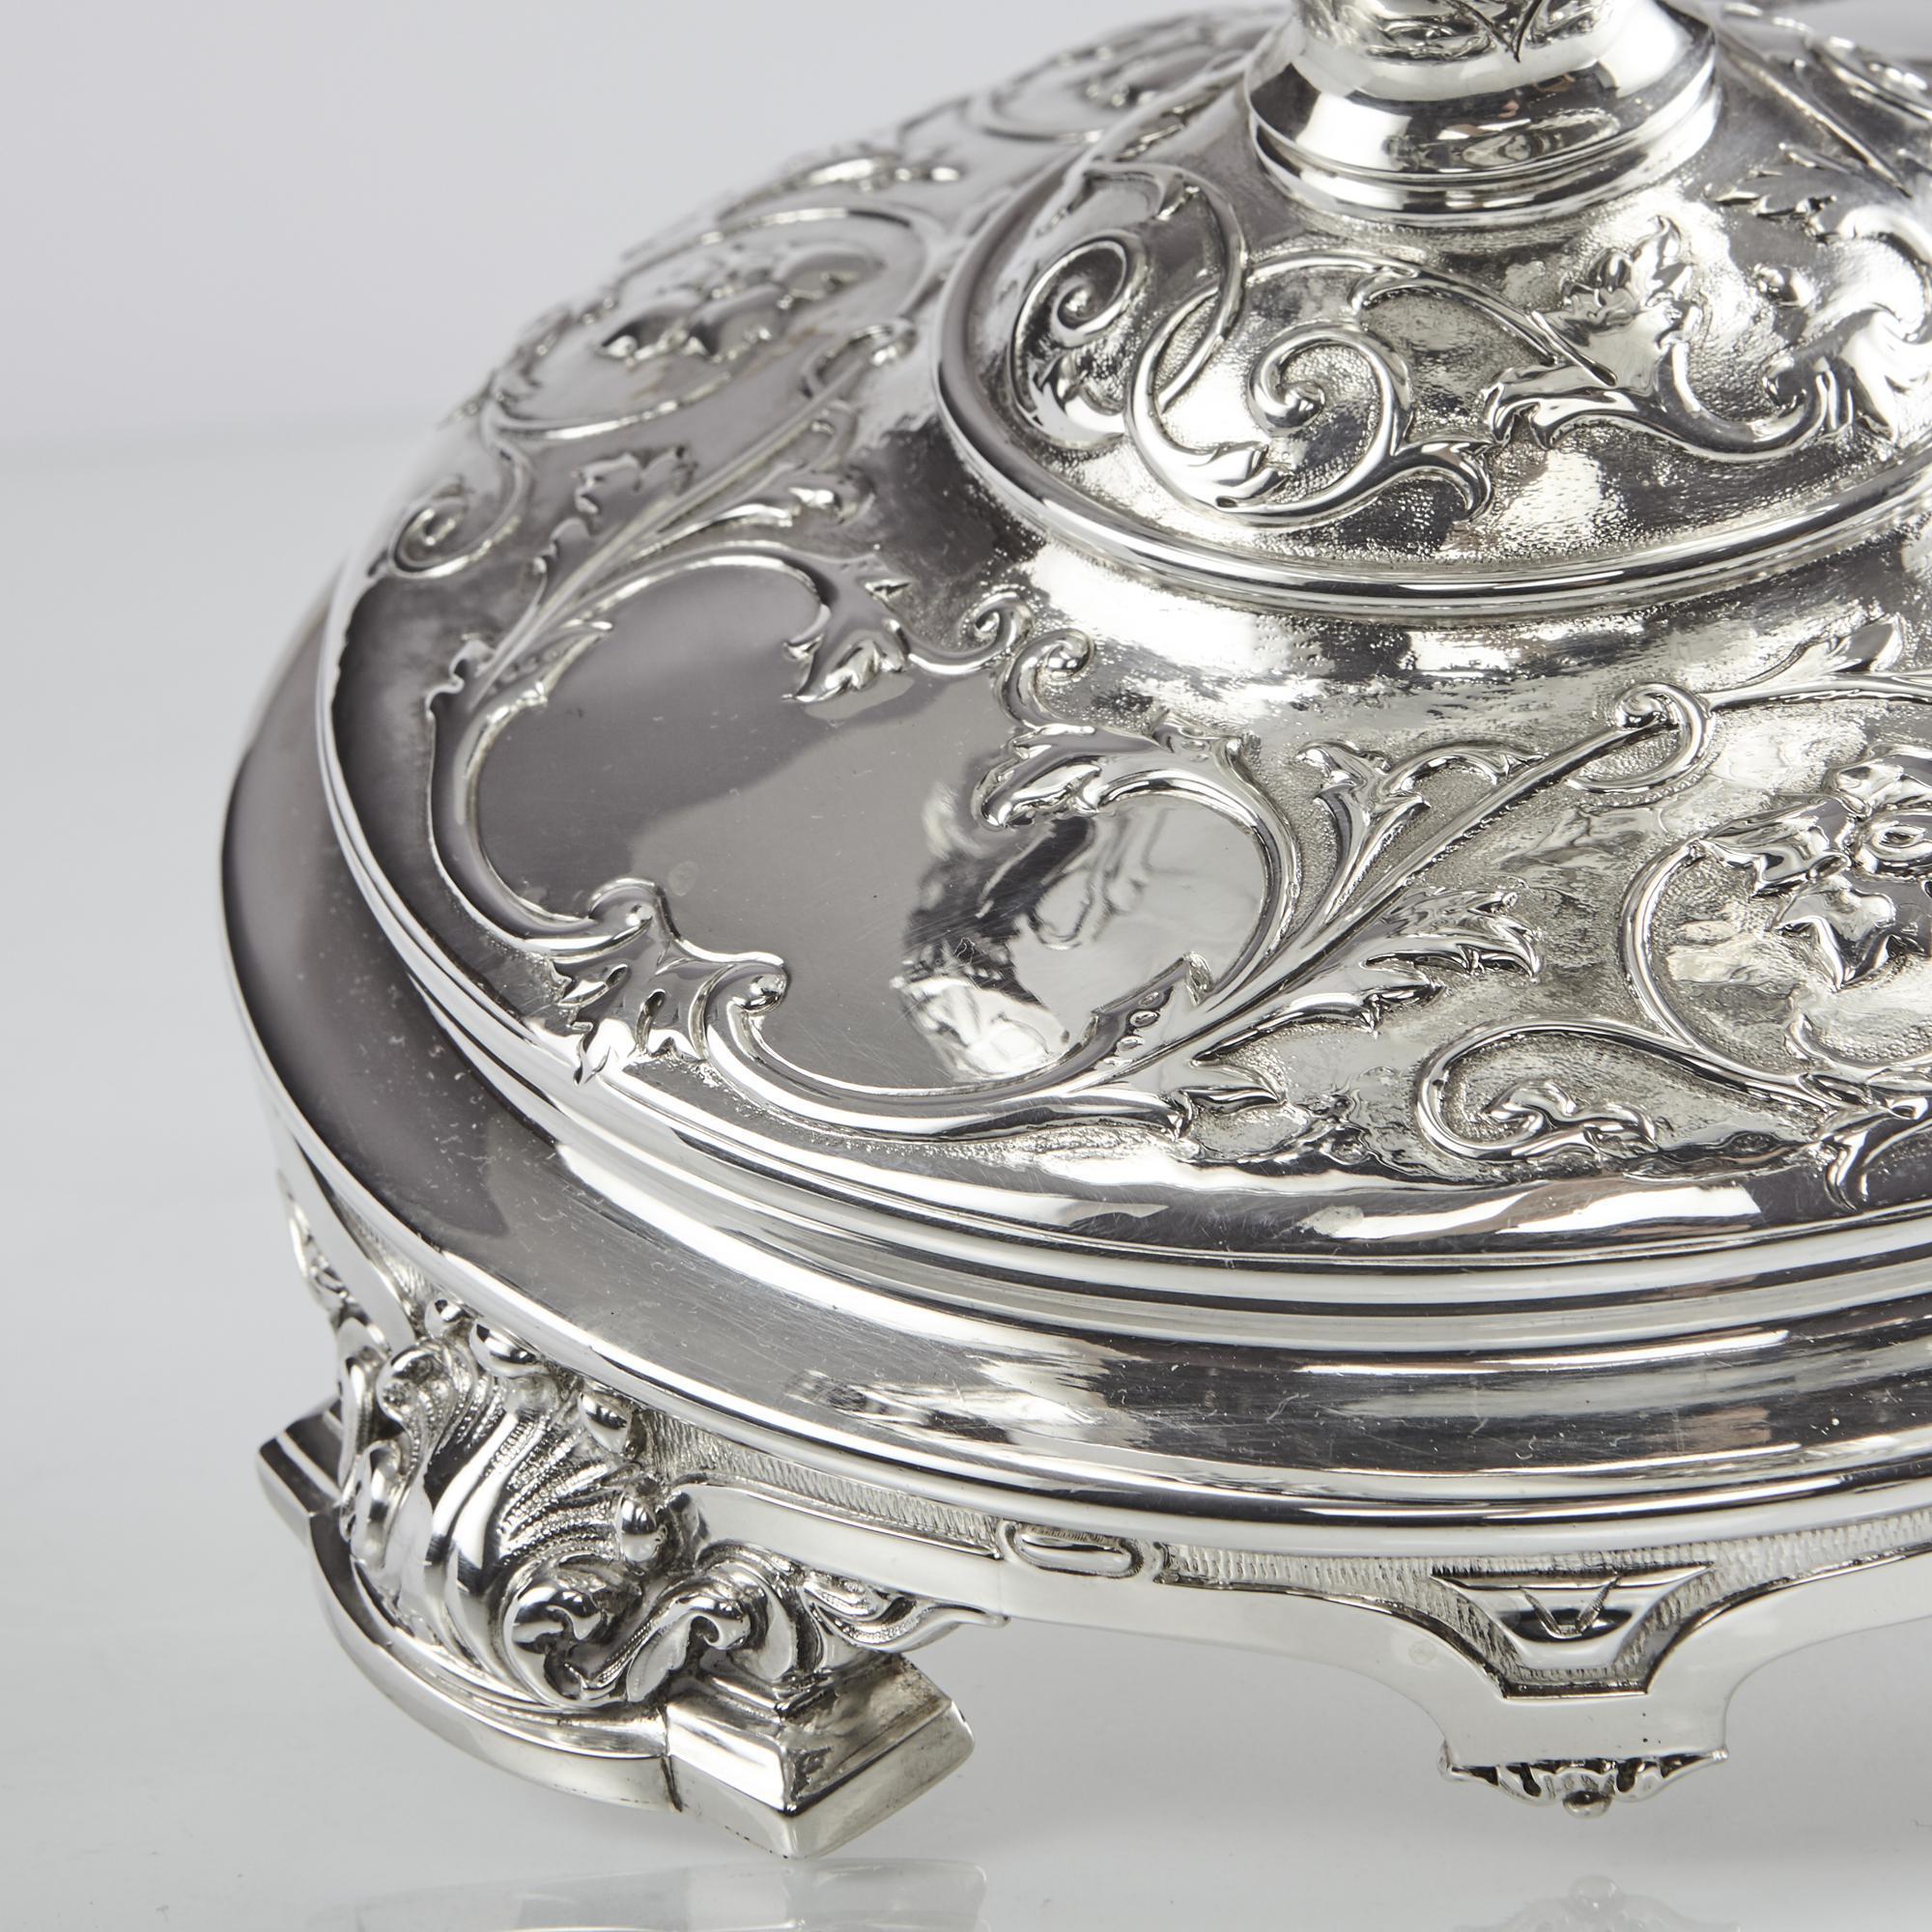 A stunning antique silver bowl or jardinière, based on a classical style with a round pedestal base and oval boat-shaped dish. It is hand-chased with bas-relief entwined leaf and flower decoration and has two scrolling handles cast as stylized